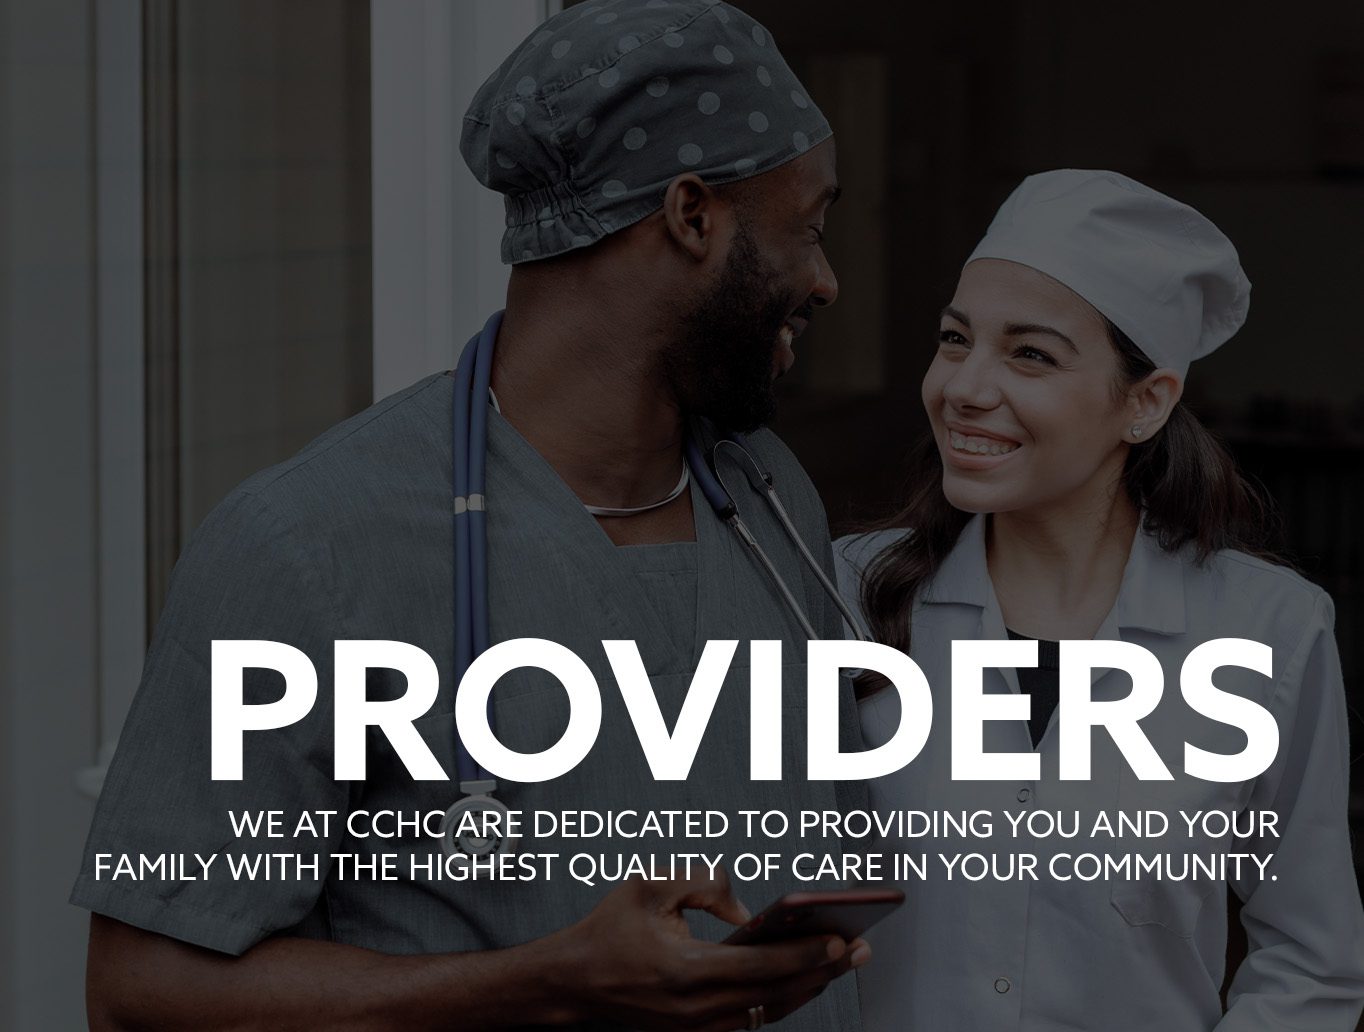 Providers we are dedicated to providing the highest quality of care in your community.